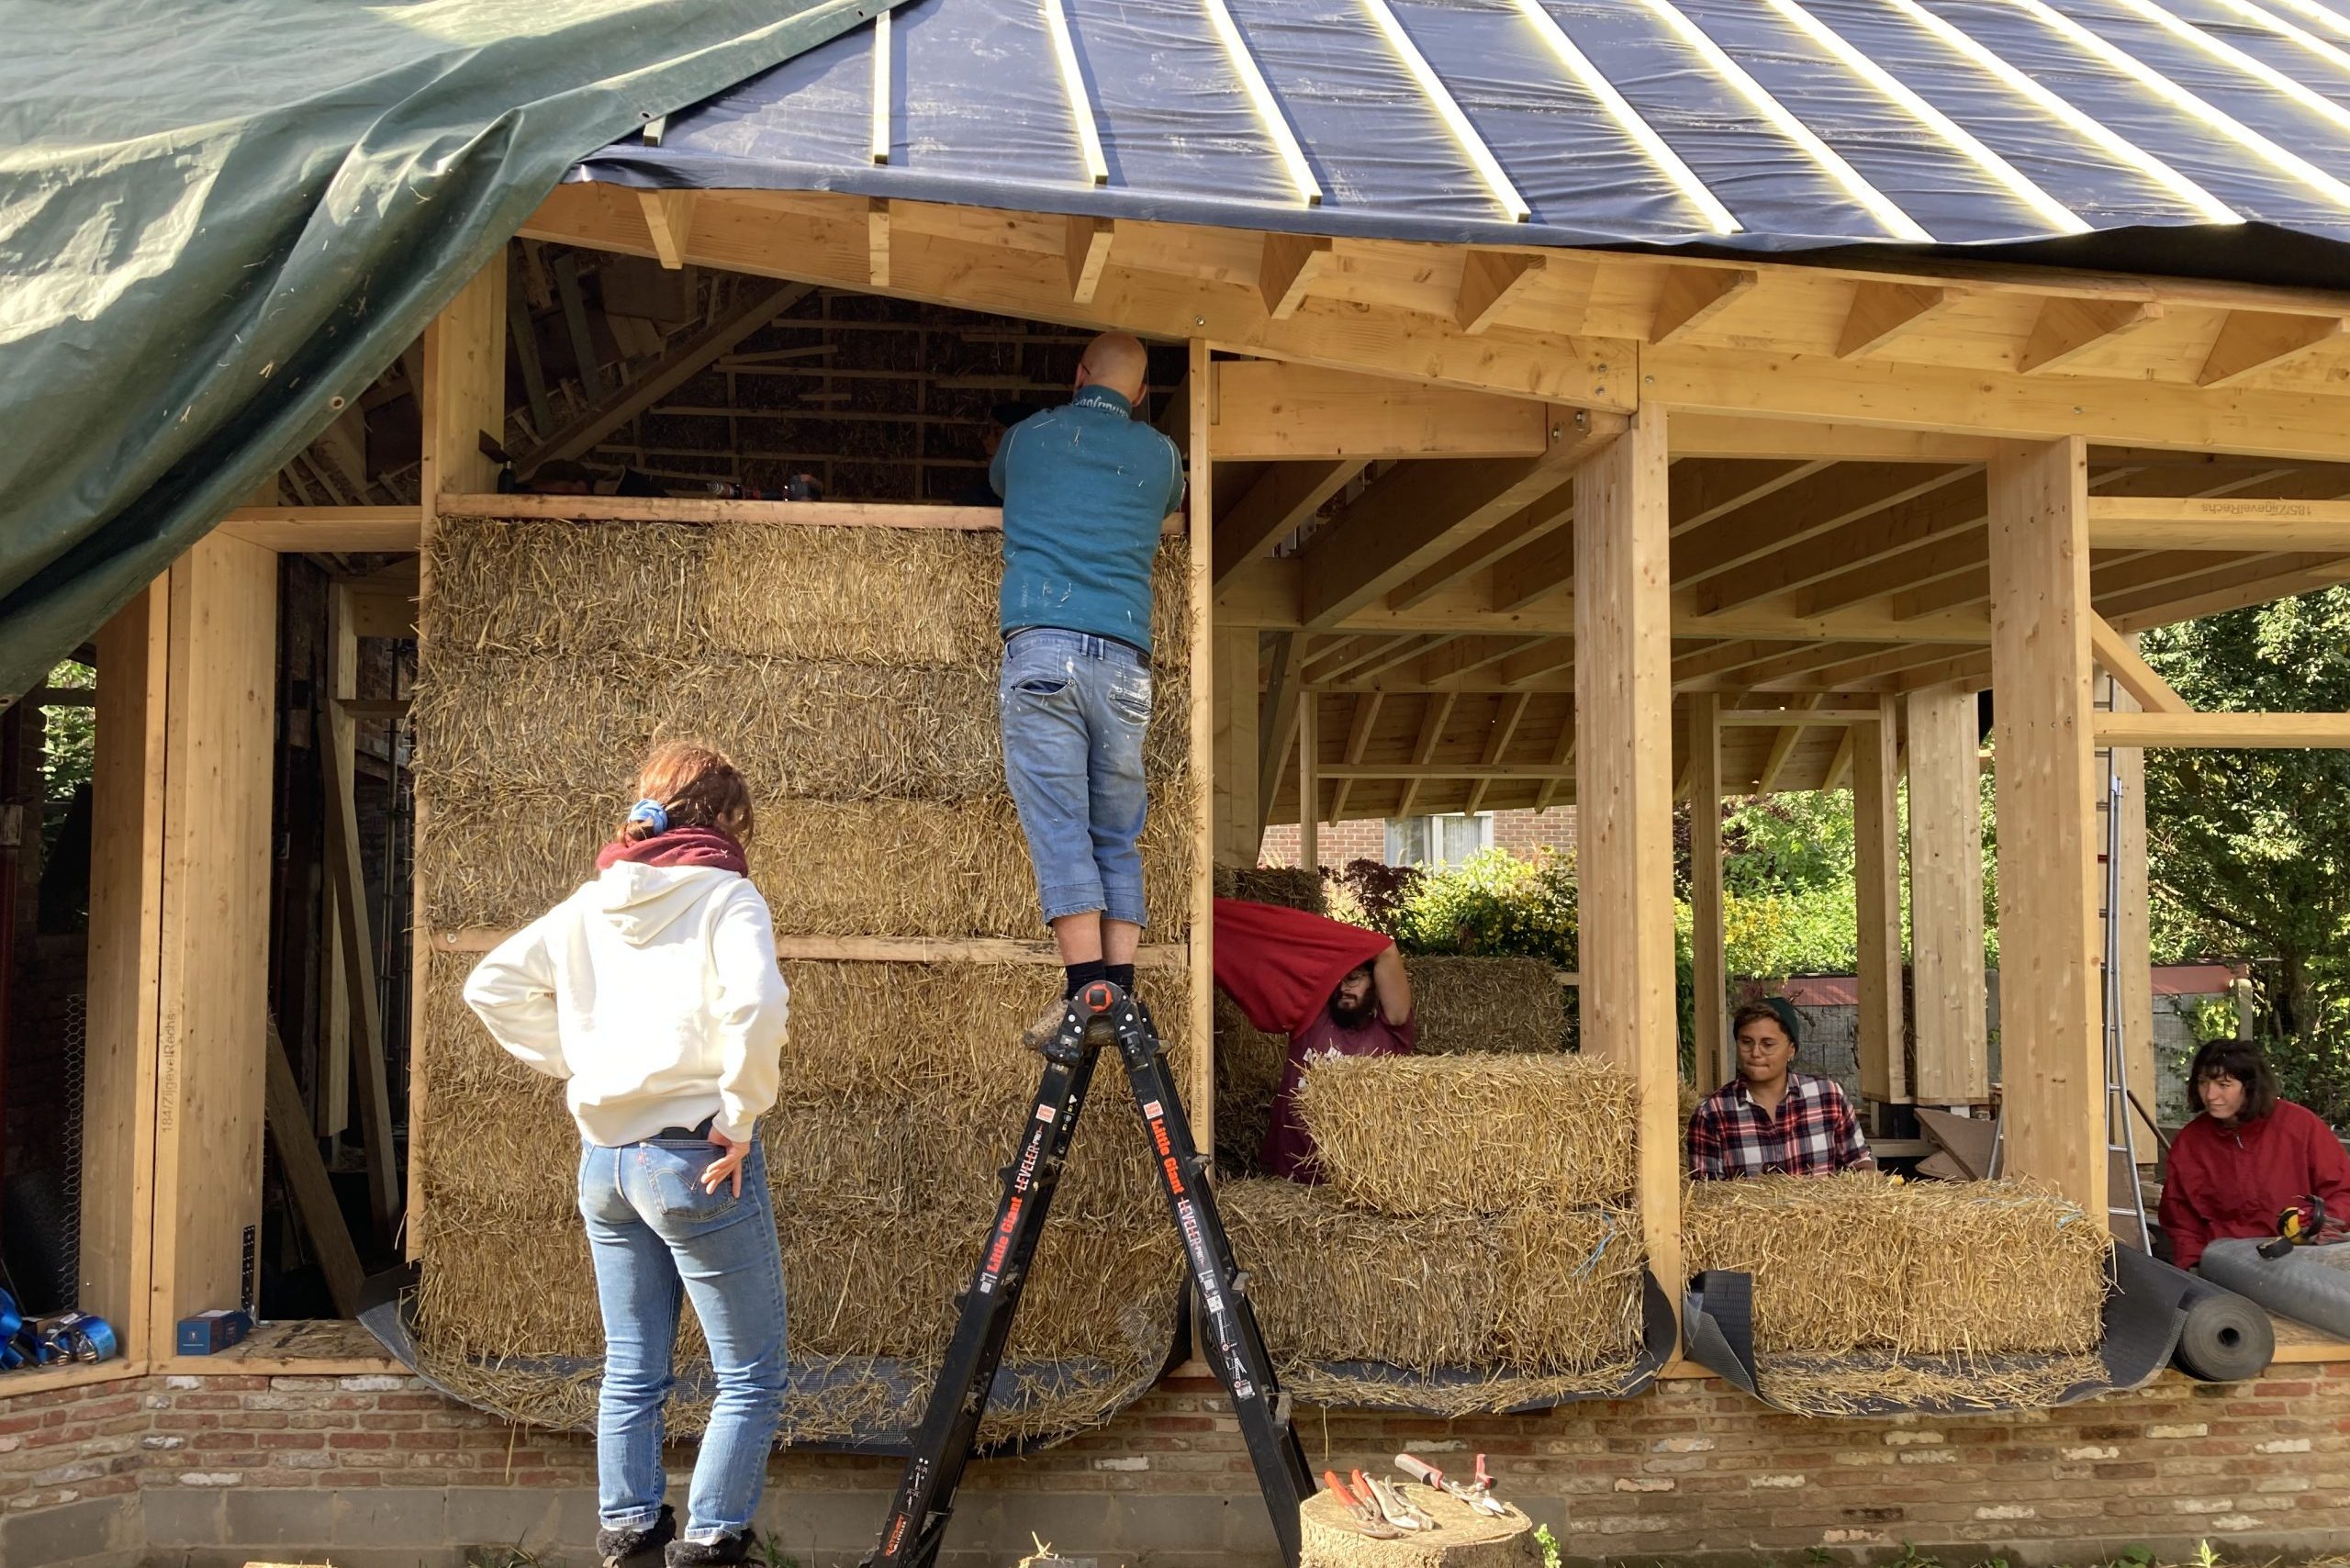 Straw Bale Construction and Self-Building